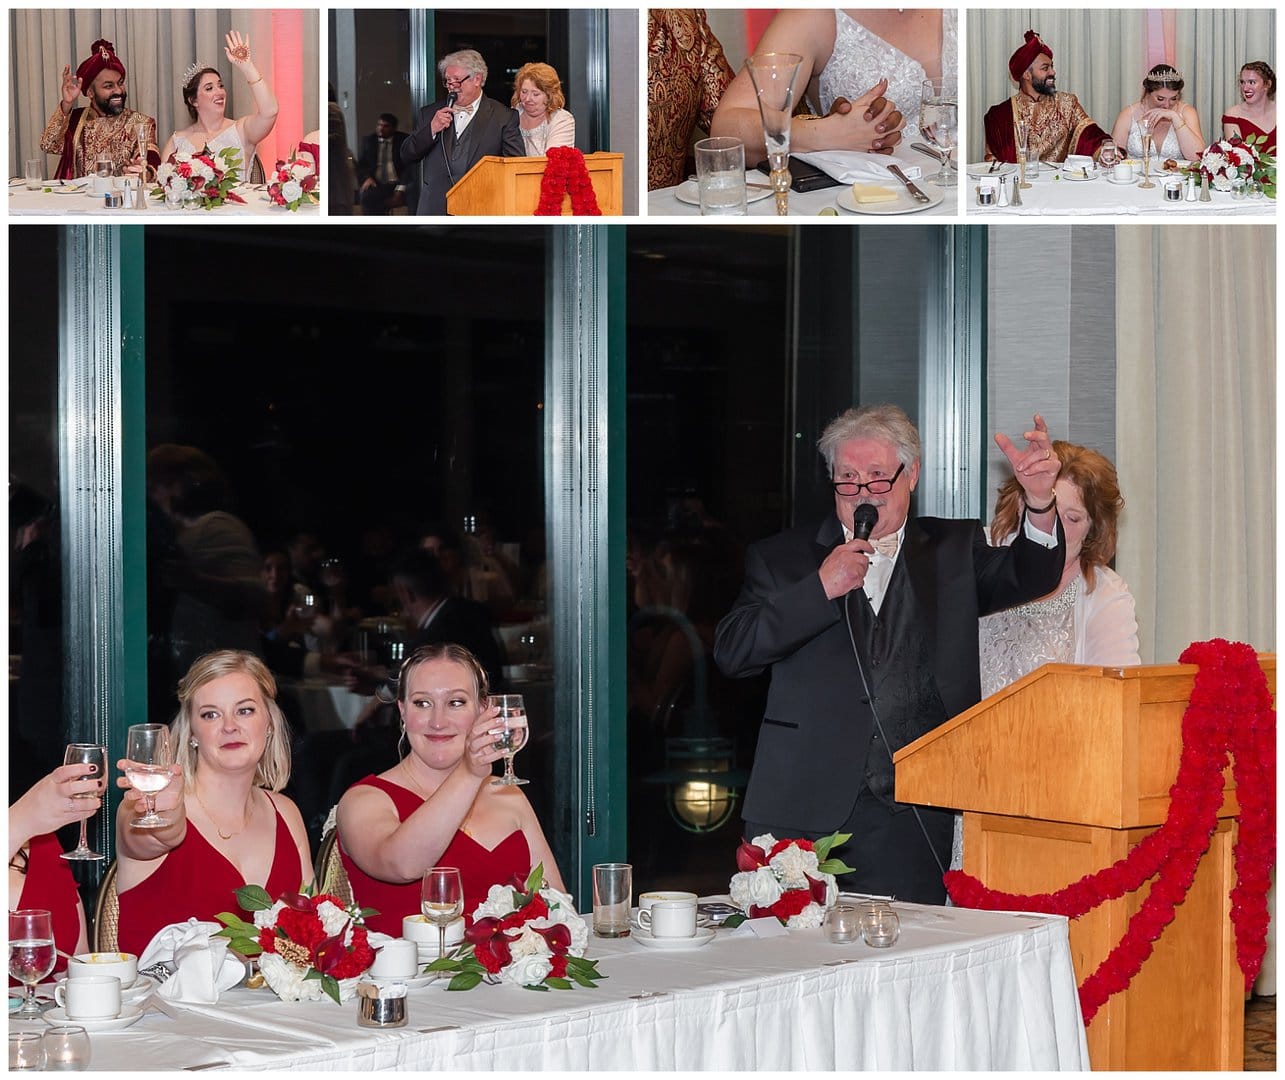 The bride's parents give their speech during the wedding reception at the Halifax Marriott Harbourfront Hotel.